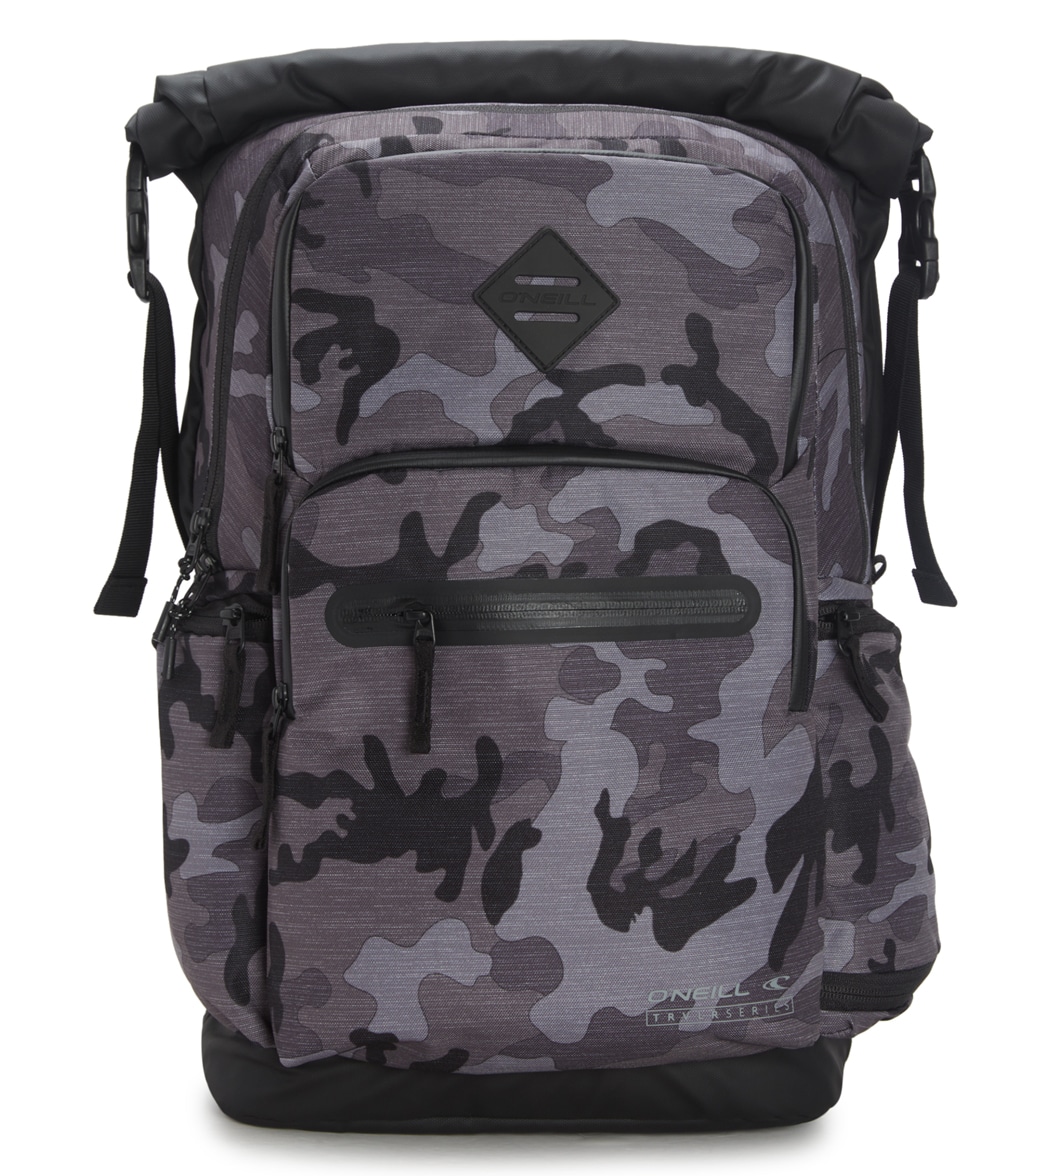 O'neill Men's Odyssey Trvlr Backpack - Black Camo One Size Polyester - Swimoutlet.com